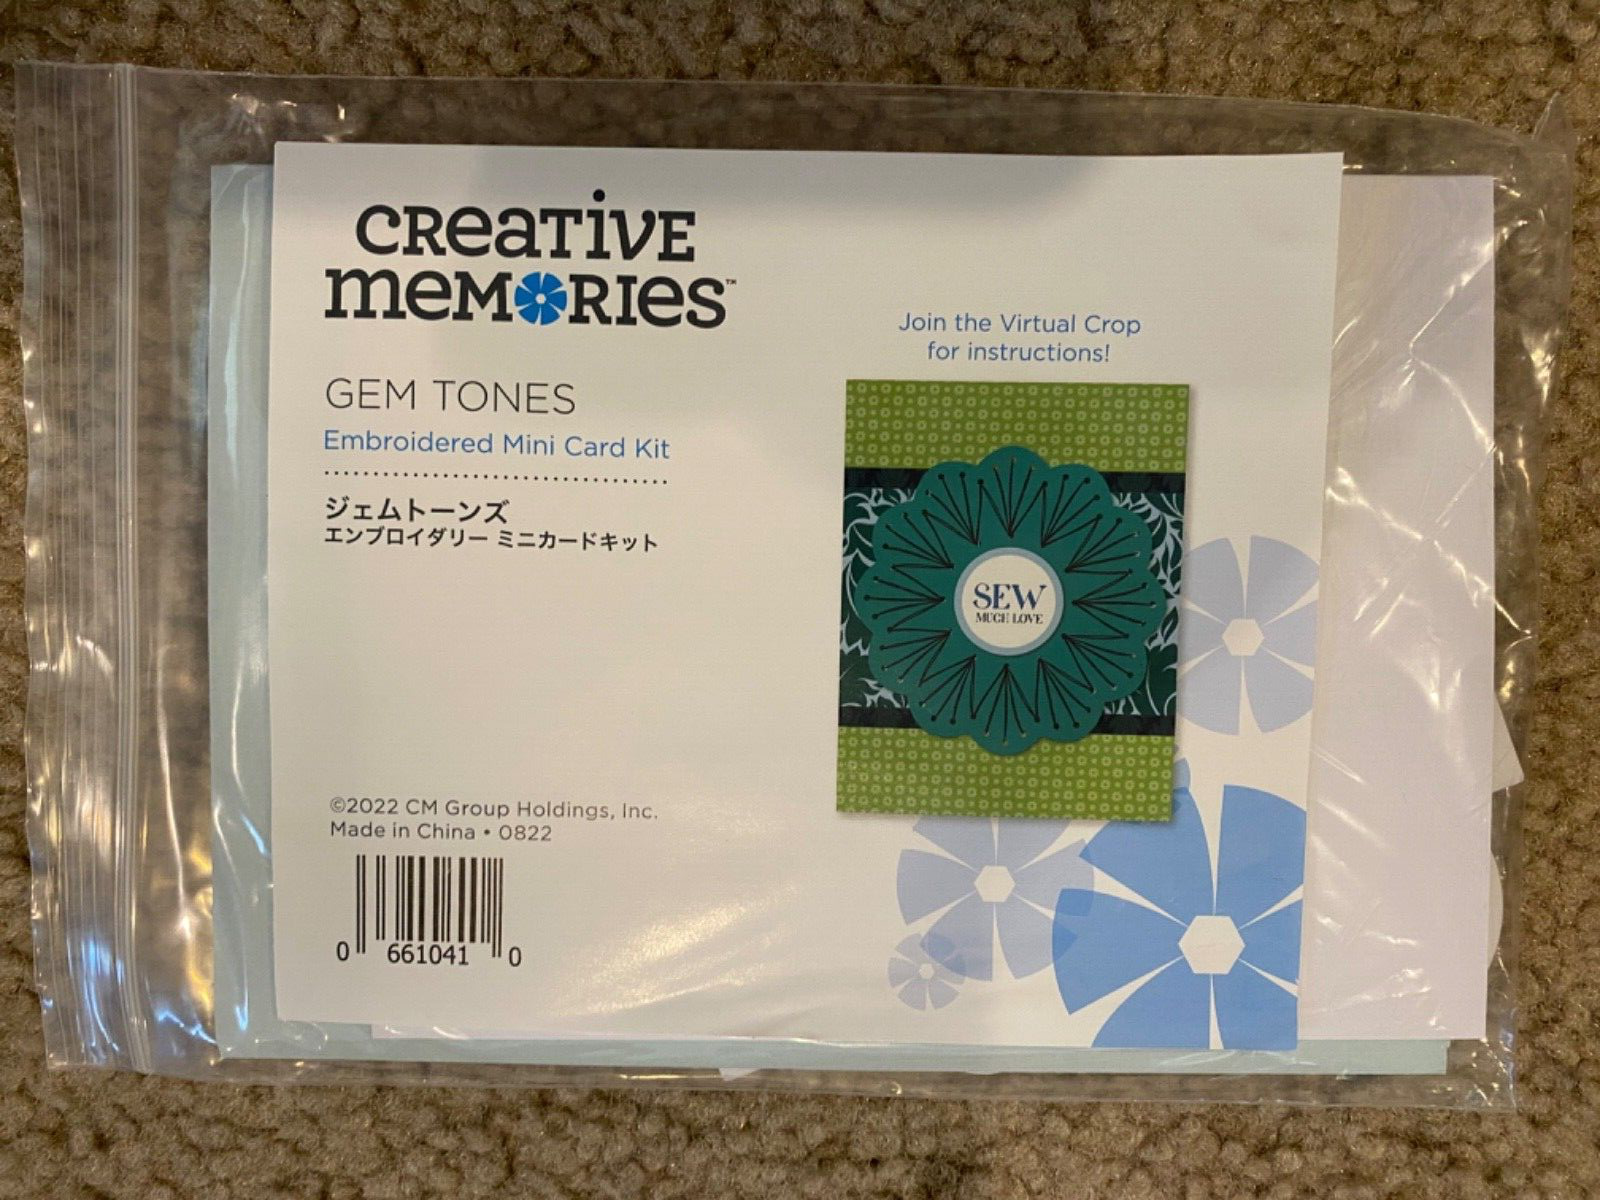 Creative Memories "Gem Tones" Embroidered Mini Card Kit - NEW! LIMITED EDITION! - $12.19